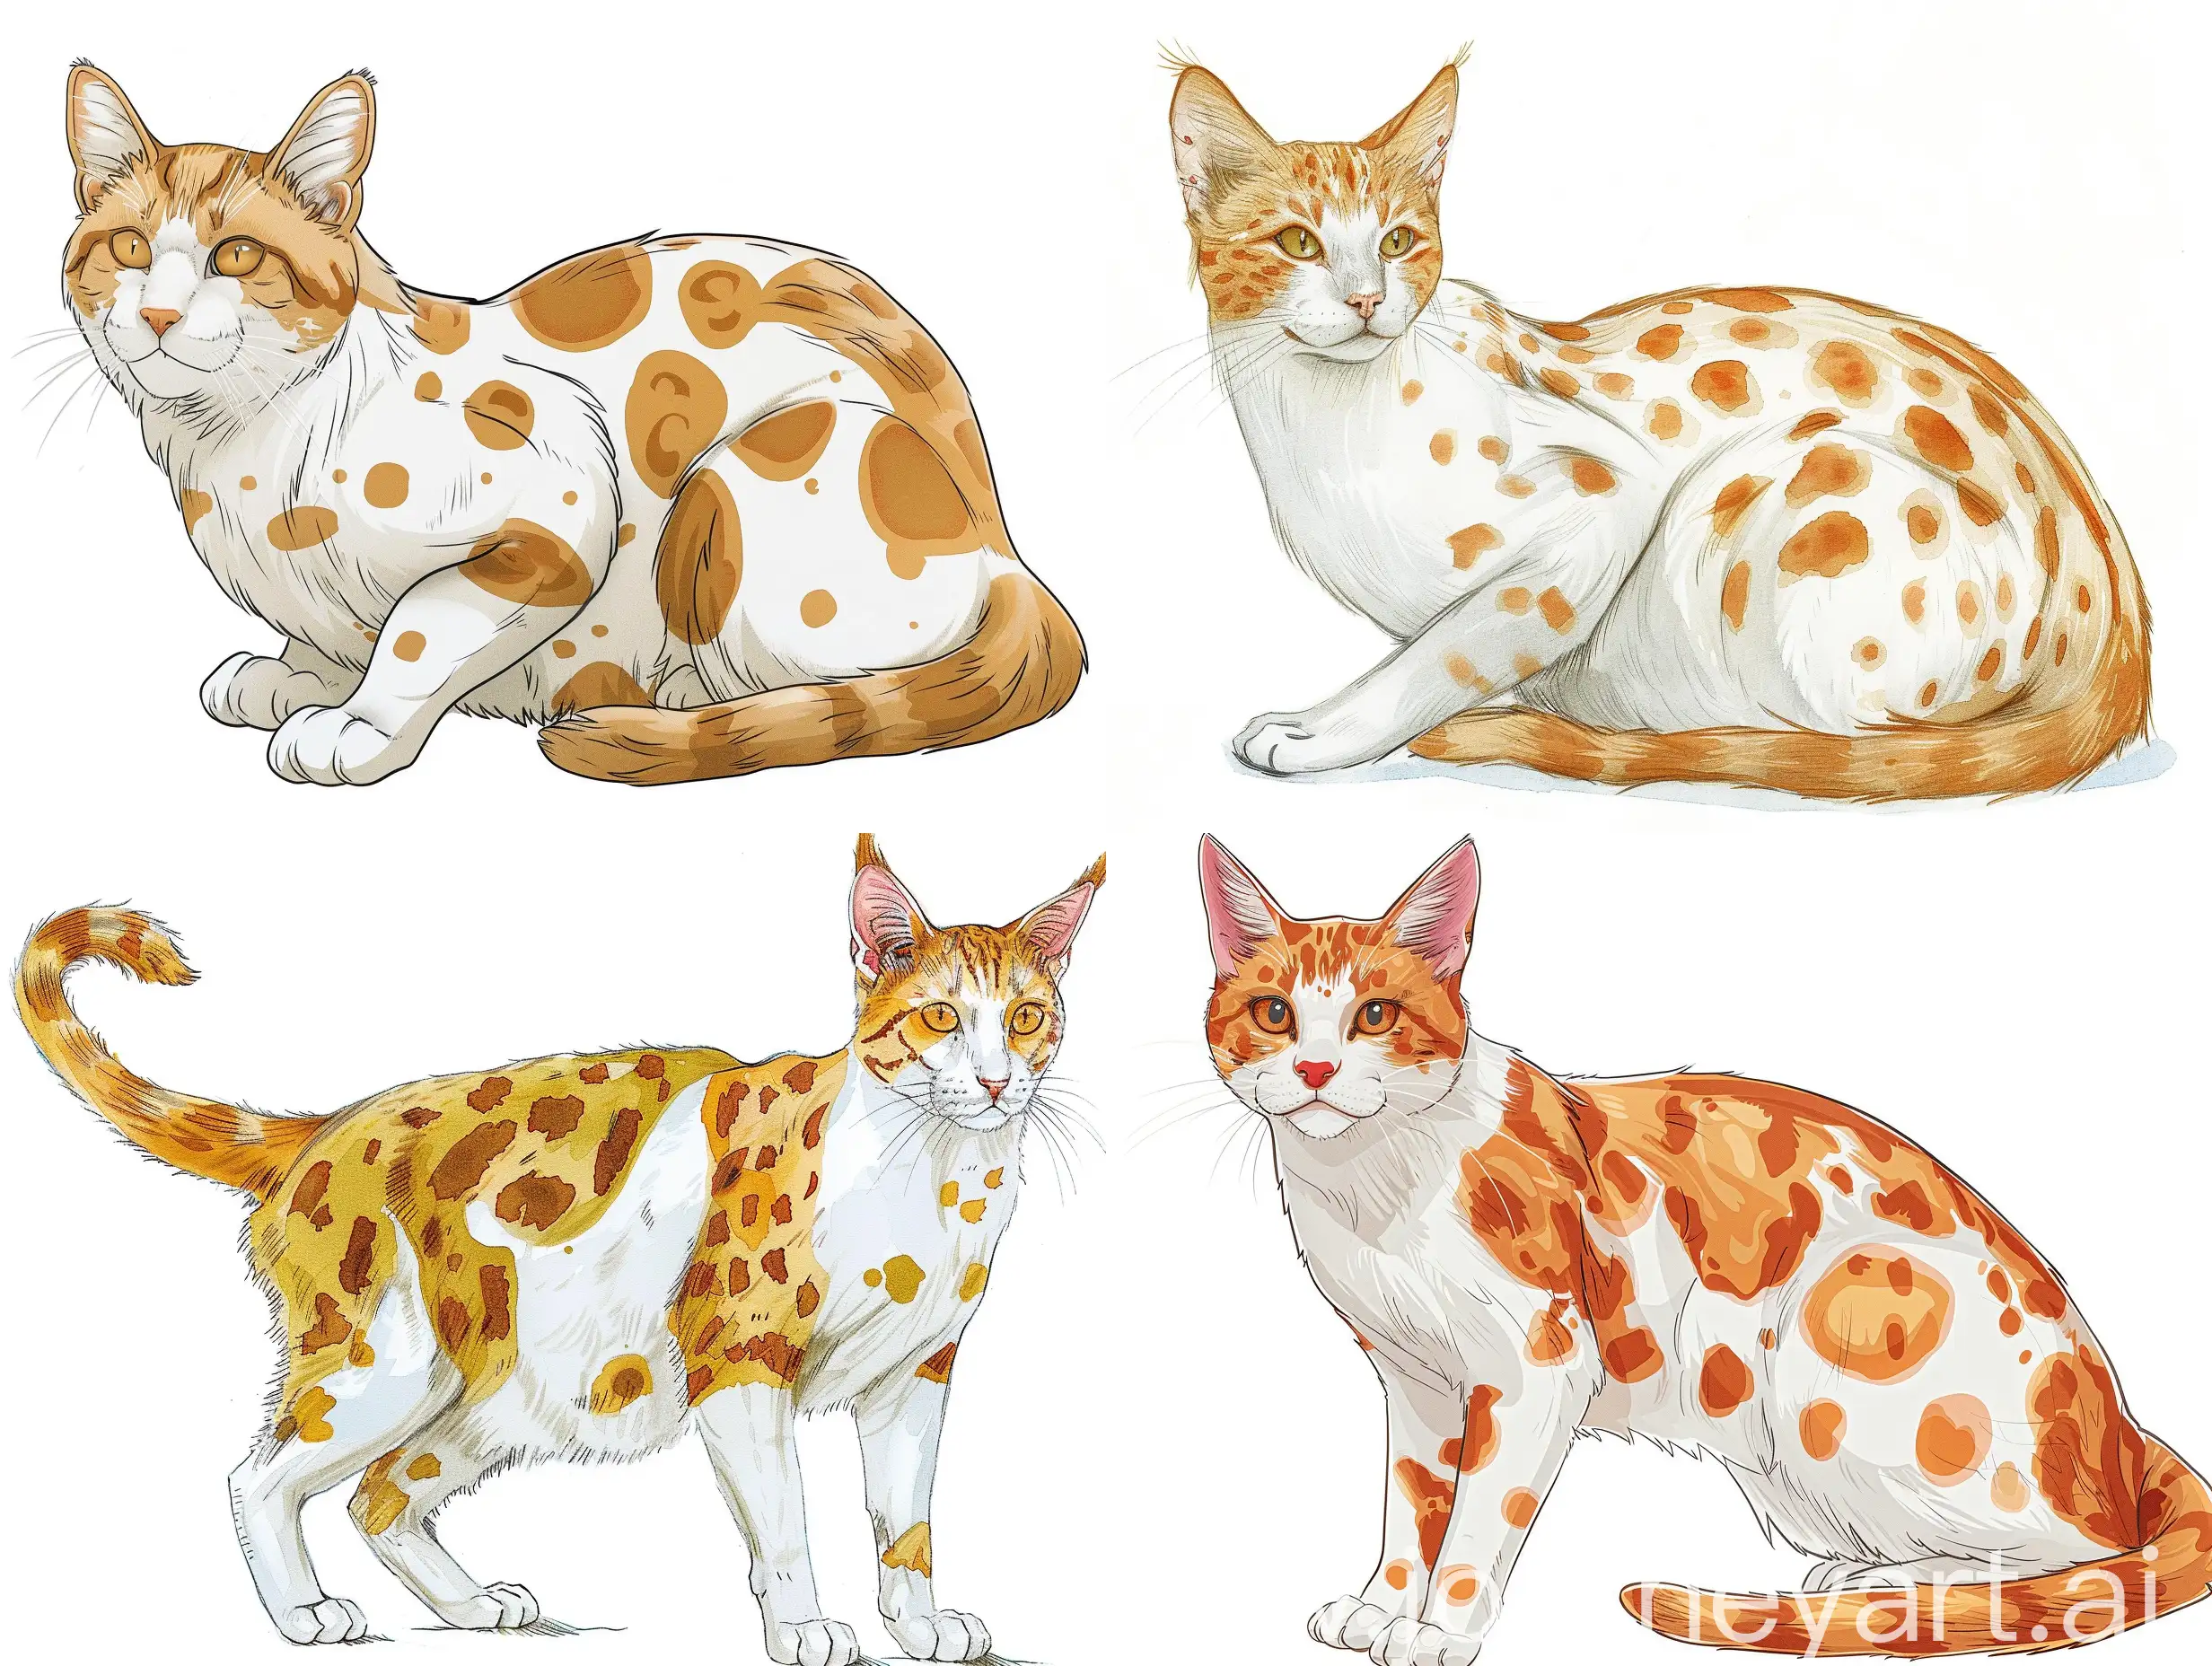 Dworterrier-Cat-with-Ginger-Spots-on-White-Background